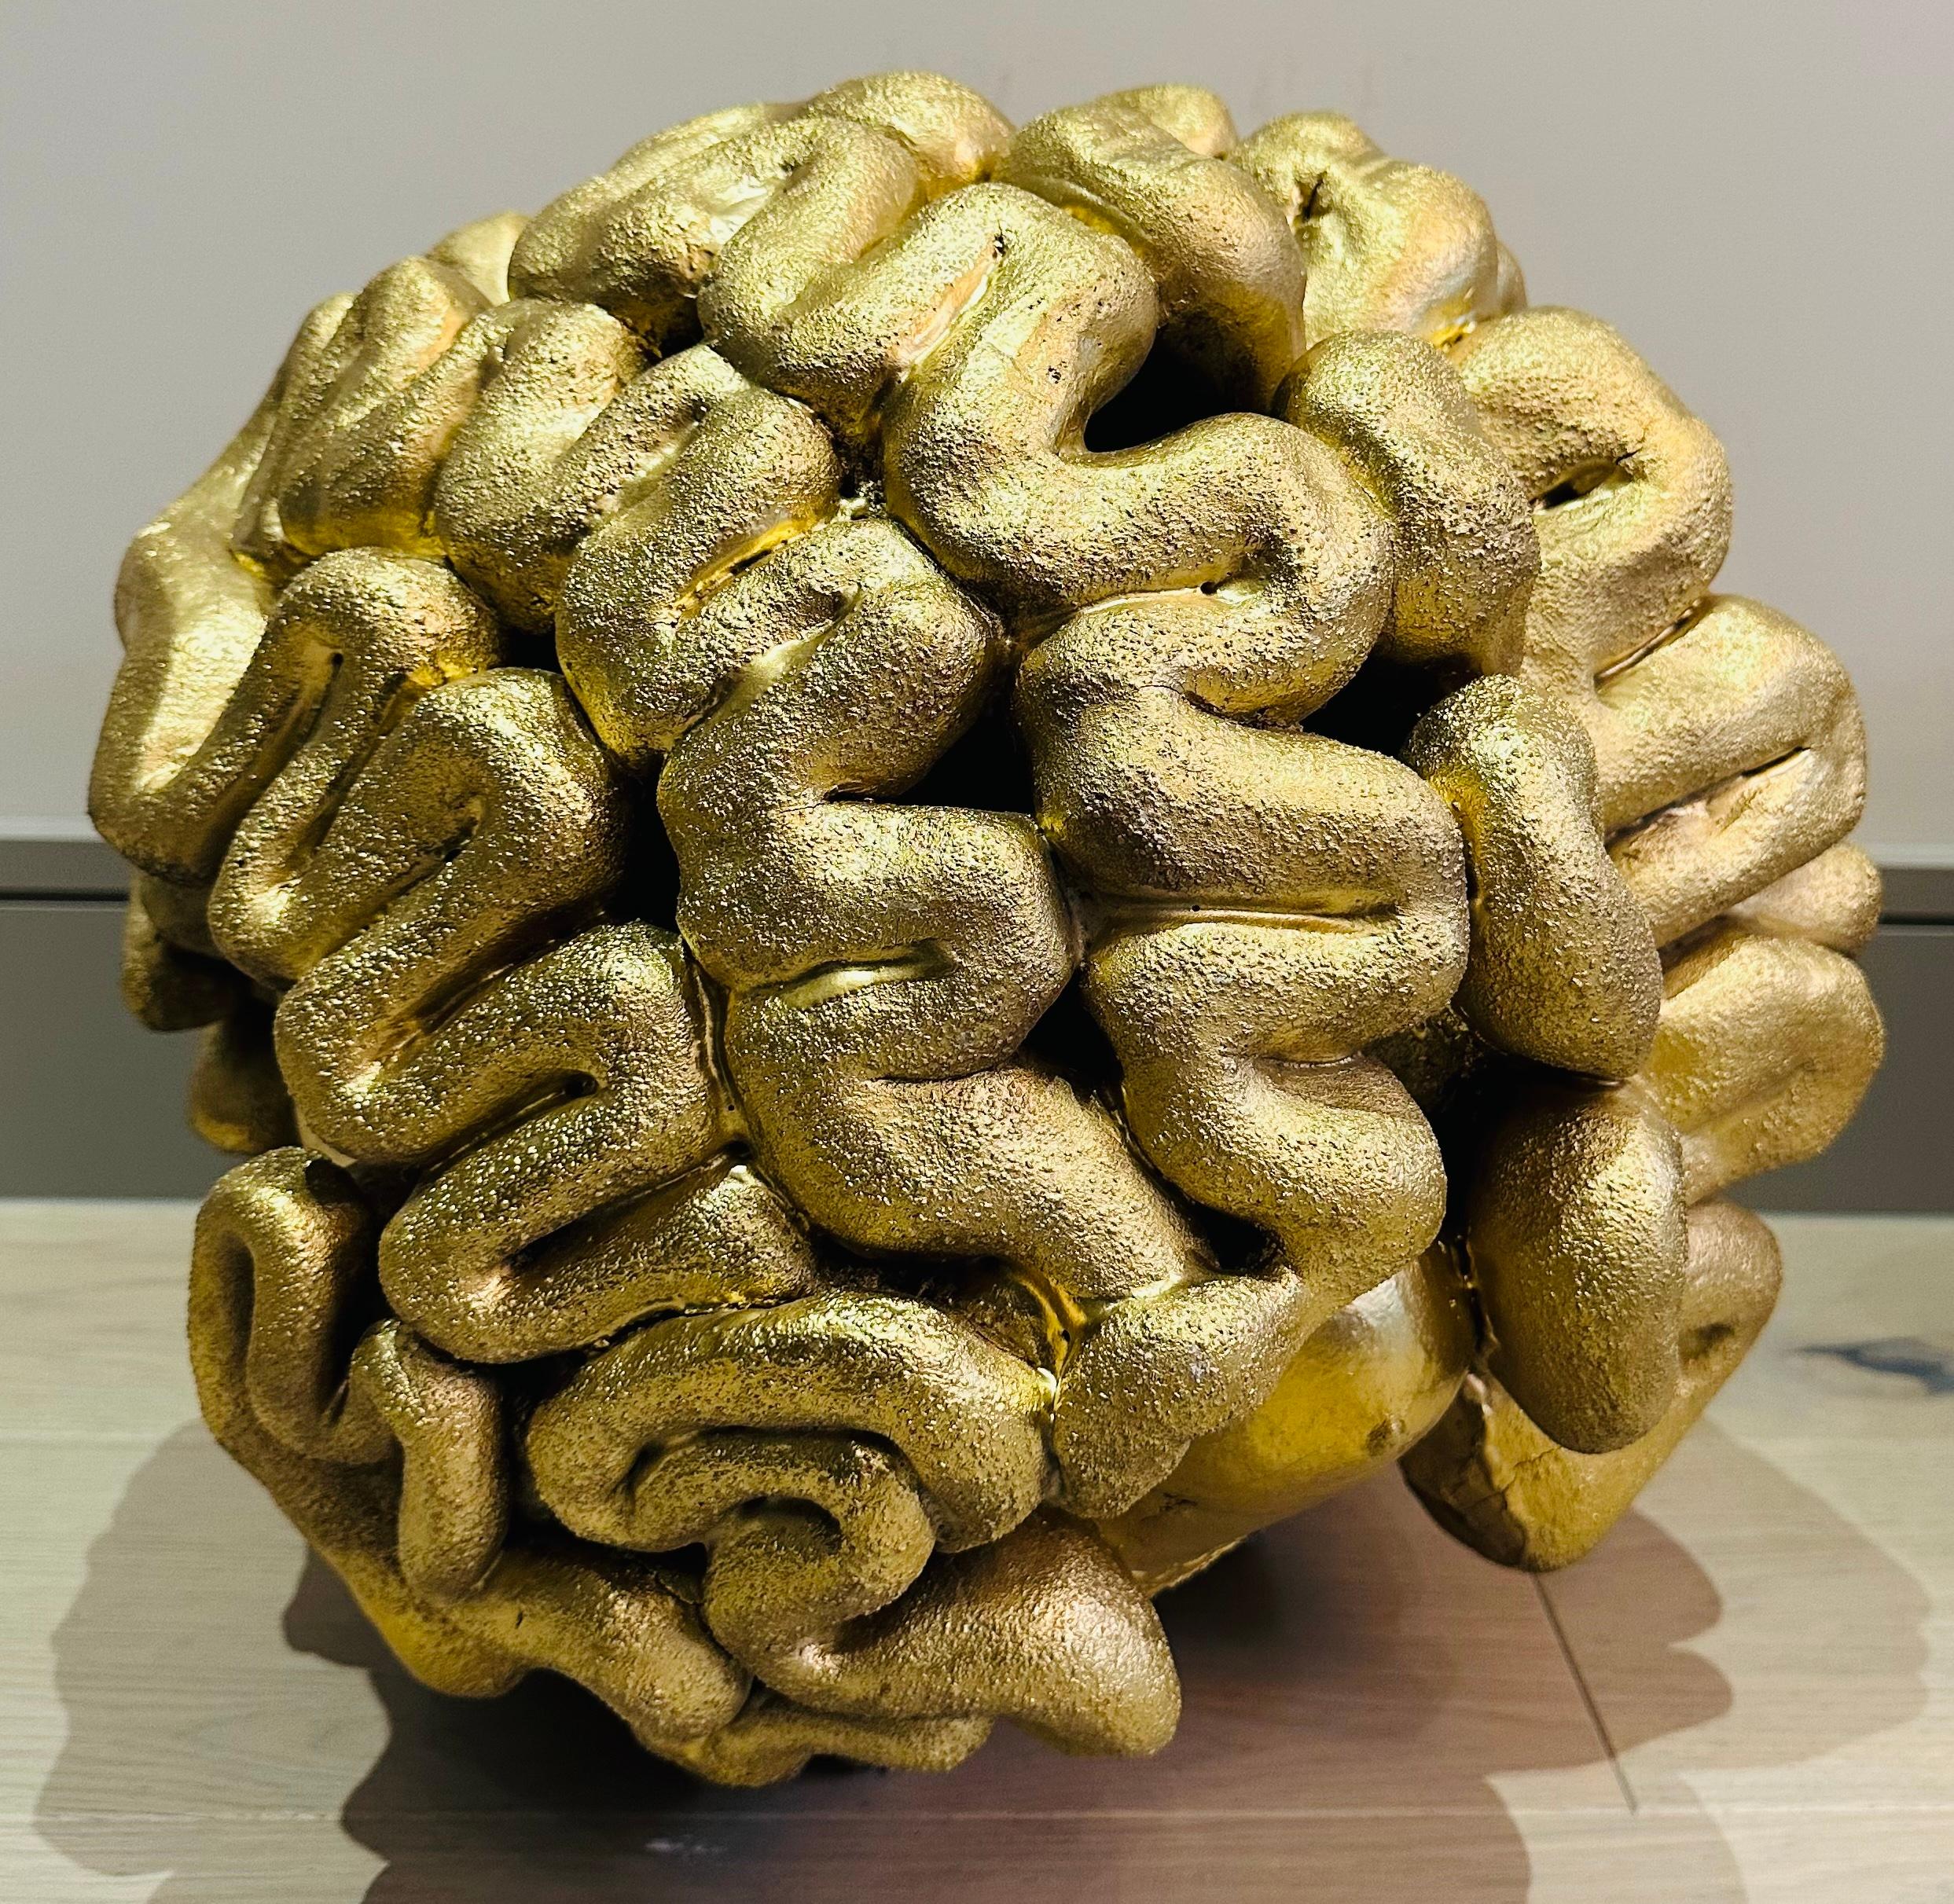 1960s French abstract terracotta space-age futuristic sculpture in the form of a brain.  The sculpture has been sprayed gold for added effect adding drama and interest. It is very heavy - the exterior is attached to a solid interior structure